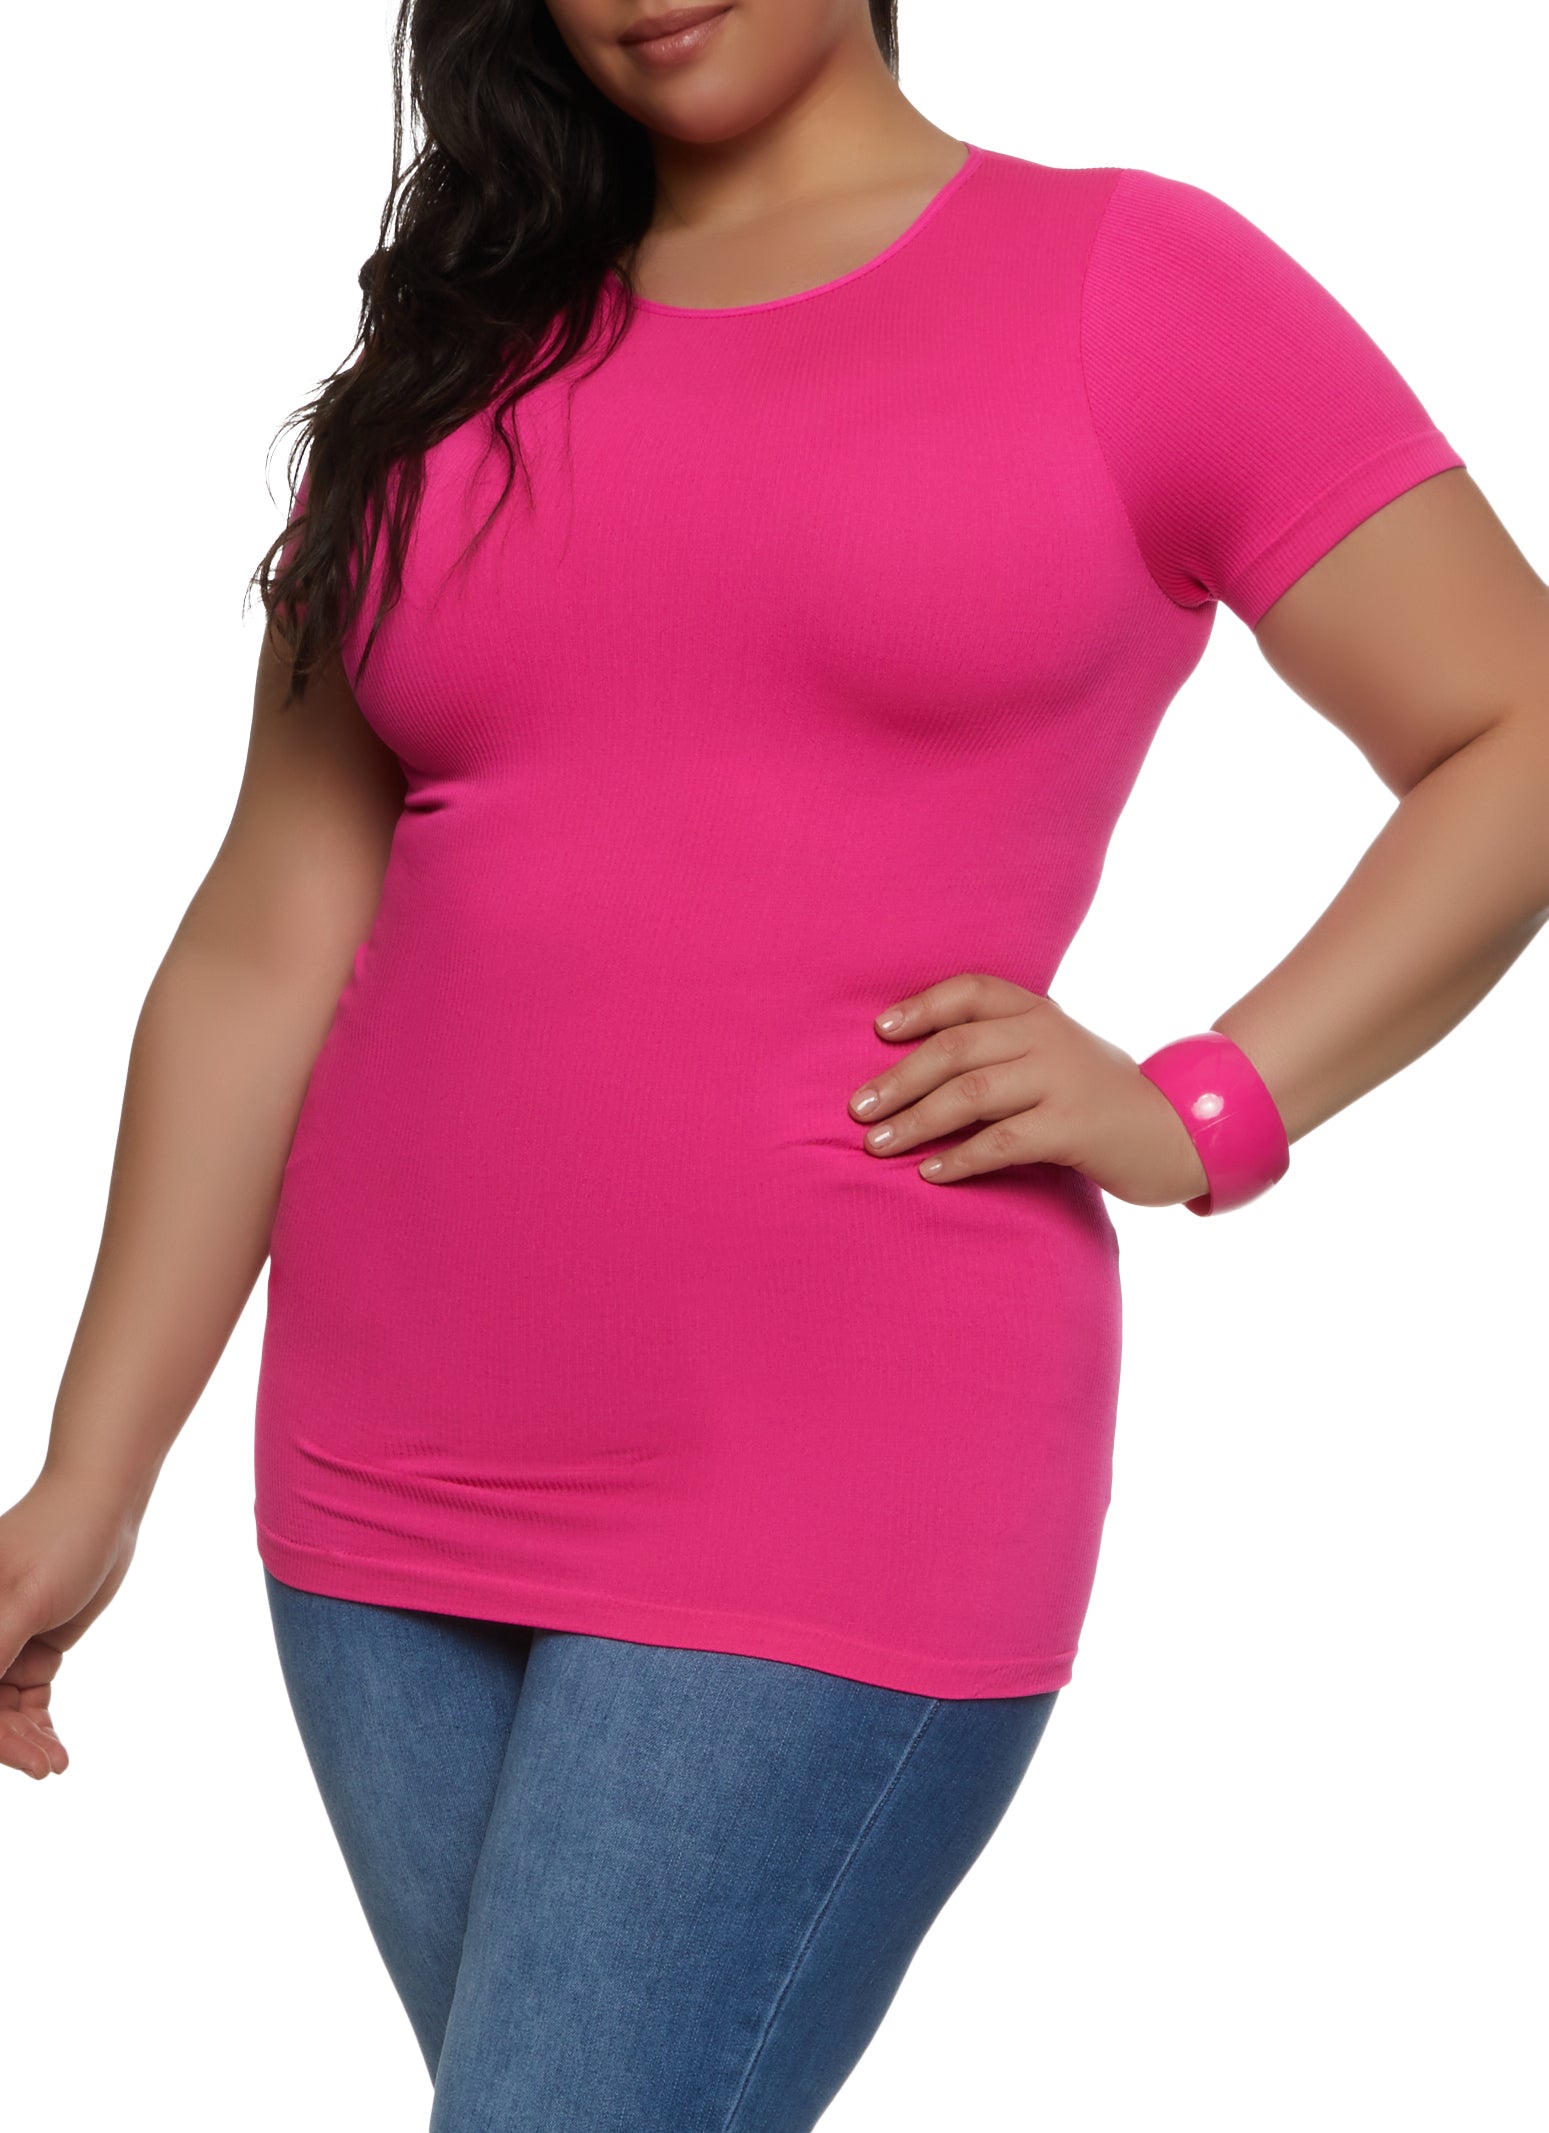  A Personal Touch Women's Plus Size Pink Round Scoop